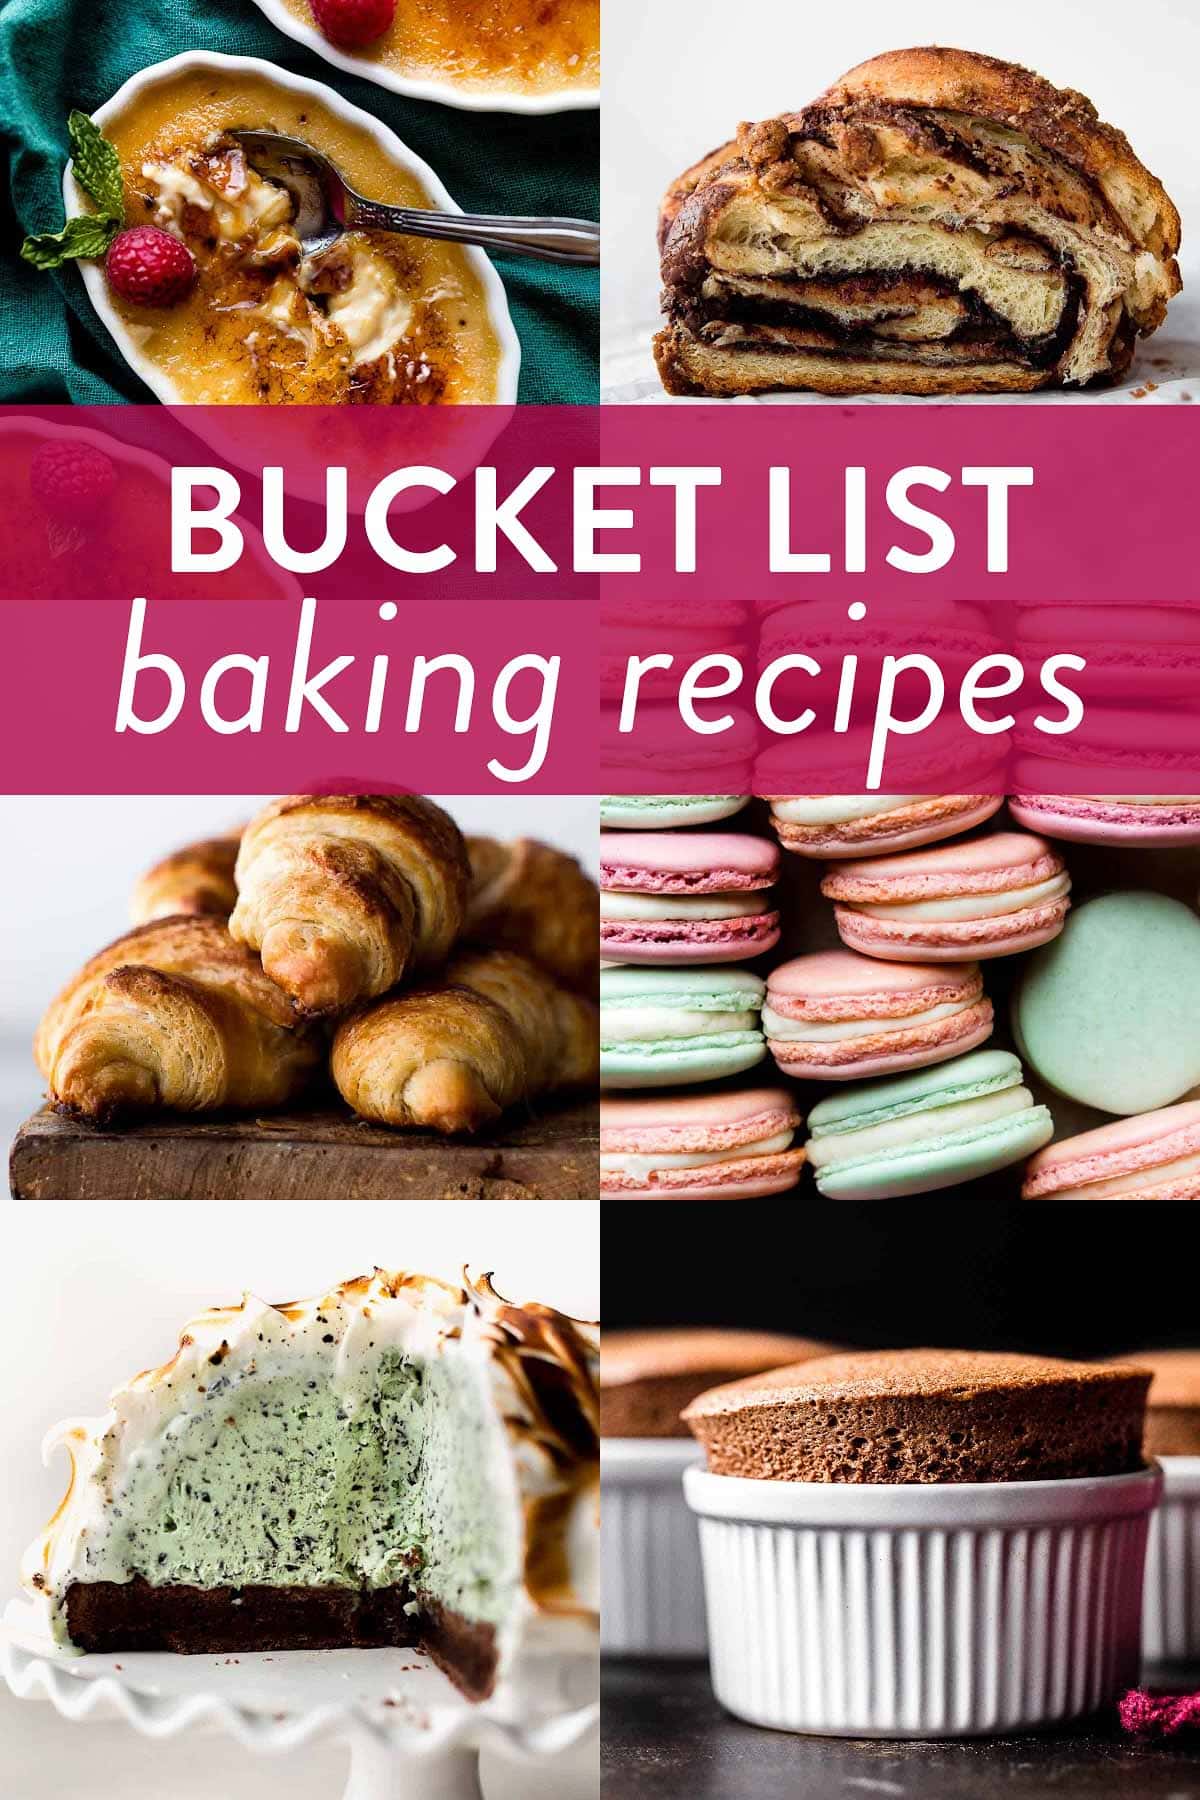 collage of baking bucket list recipes including photos of creme brulee, Nutella babka, croissants, French macarons, souffle, and baked Alaska.